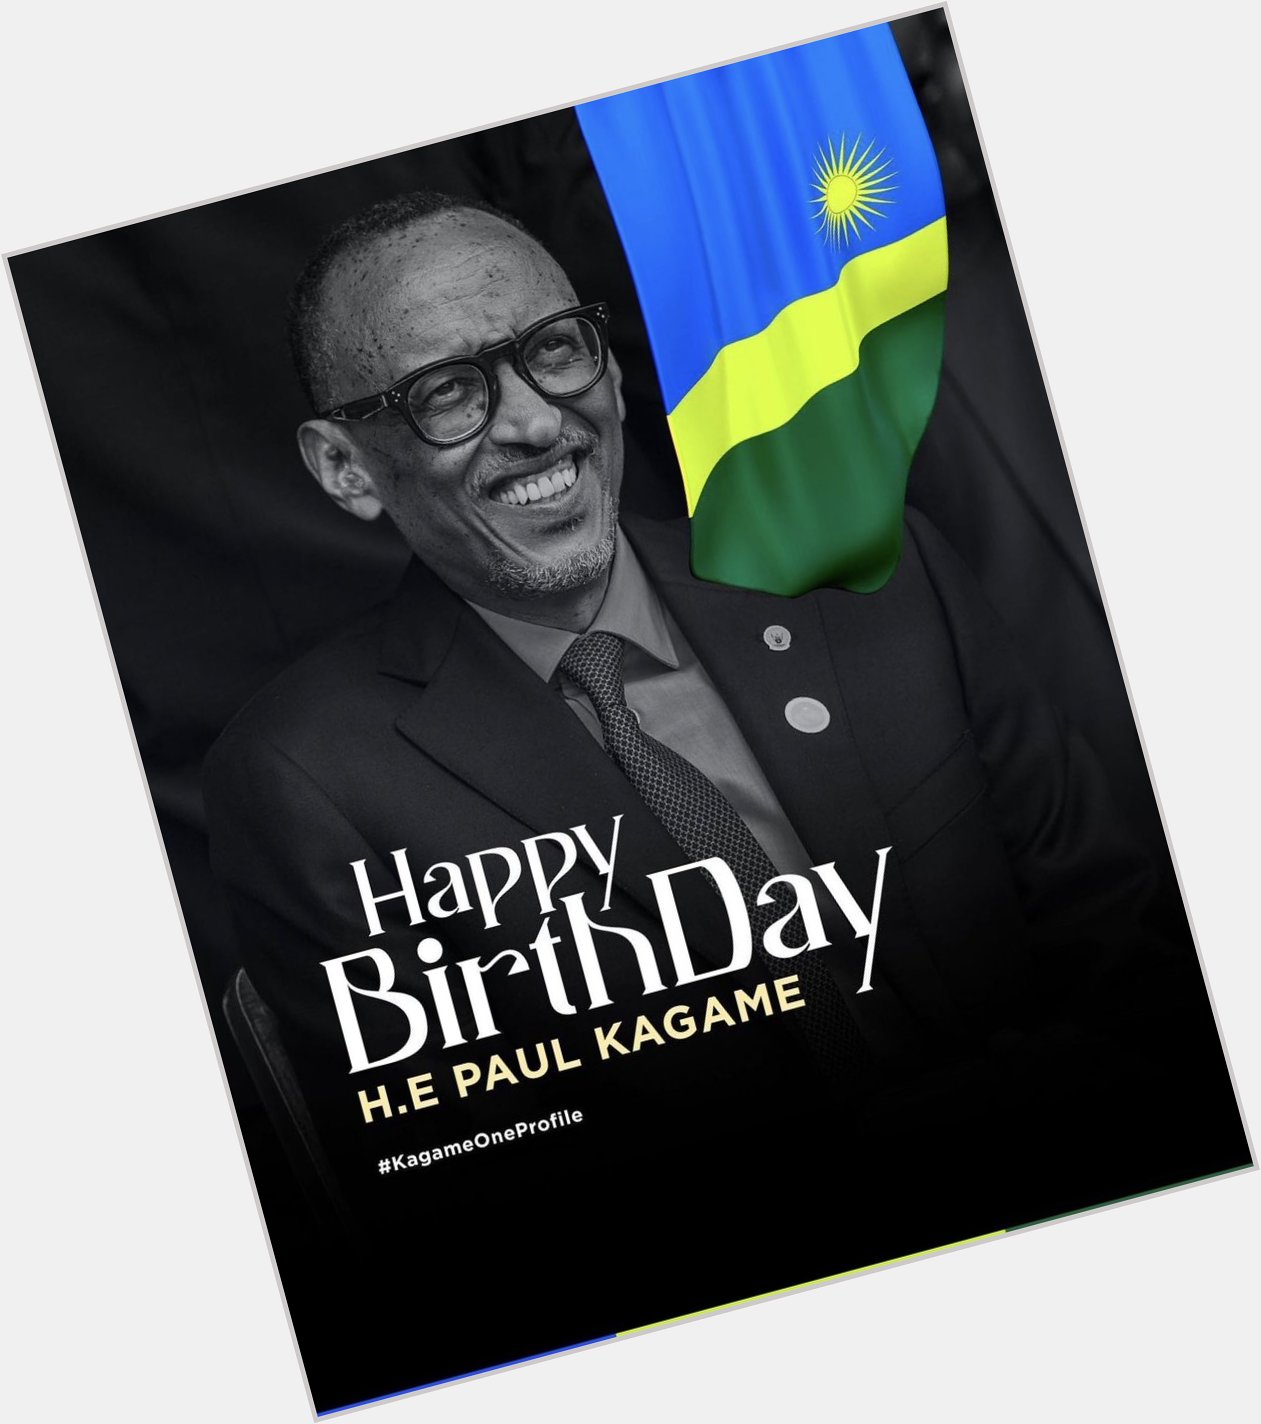 Happy Birthday my beloved President His Excellency Paul Kagame 